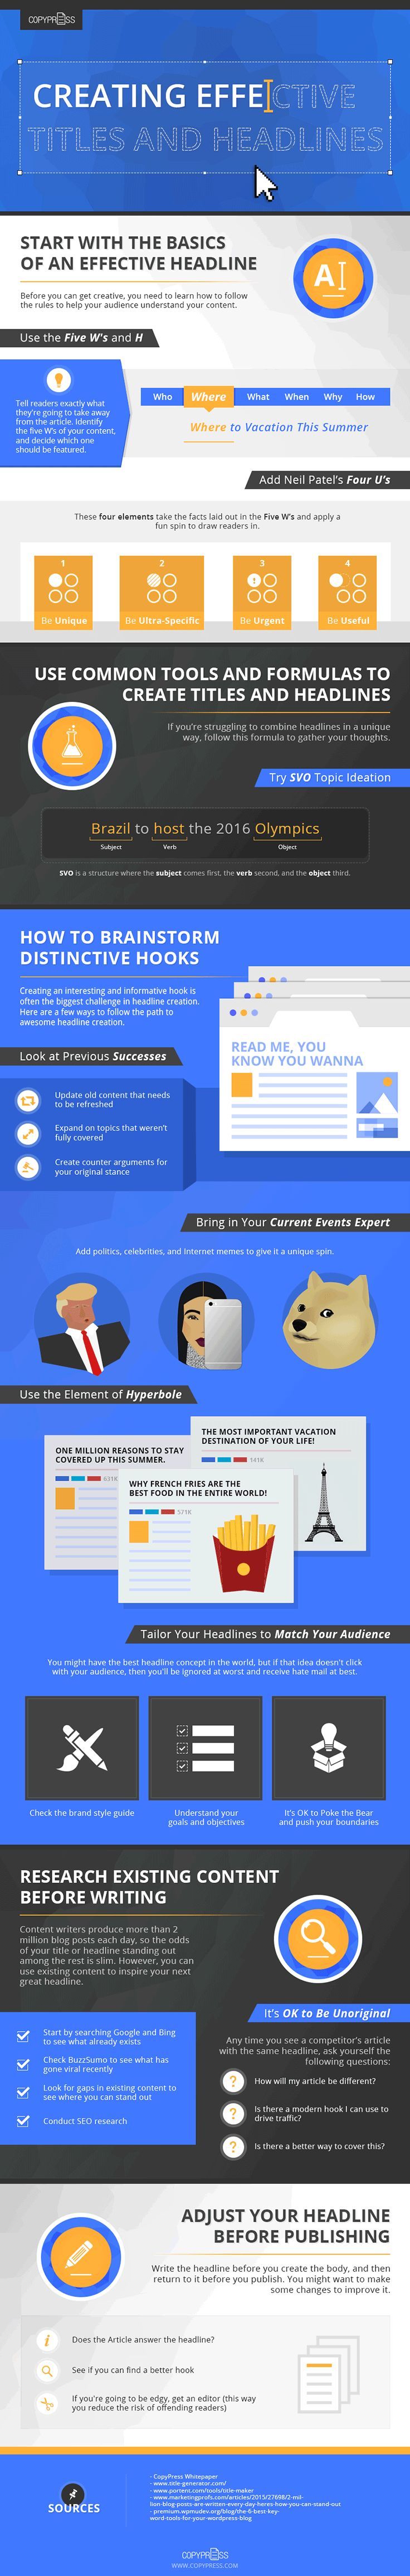 1532241885_929_Marketing-Infographic-Blogging-tips-Wondering-how-to-write-a-headline-that-gets-clicks-and-shares-Th Marketing Infographic : Blogging tips: Wondering how to write a headline that gets clicks and shares? Th...